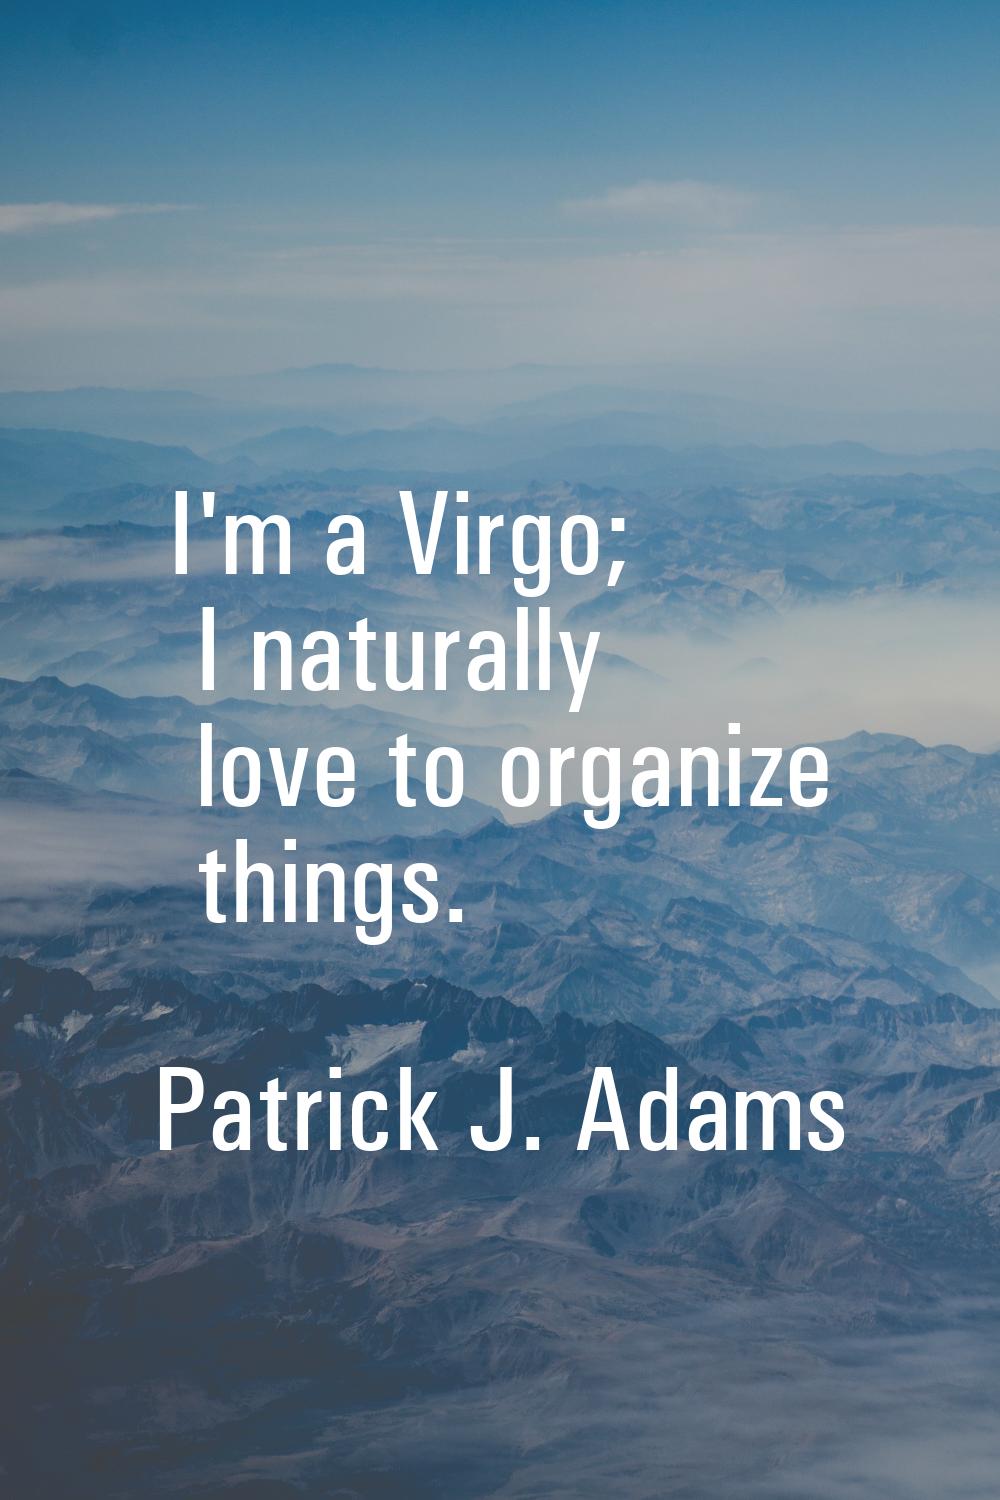 I'm a Virgo; I naturally love to organize things.